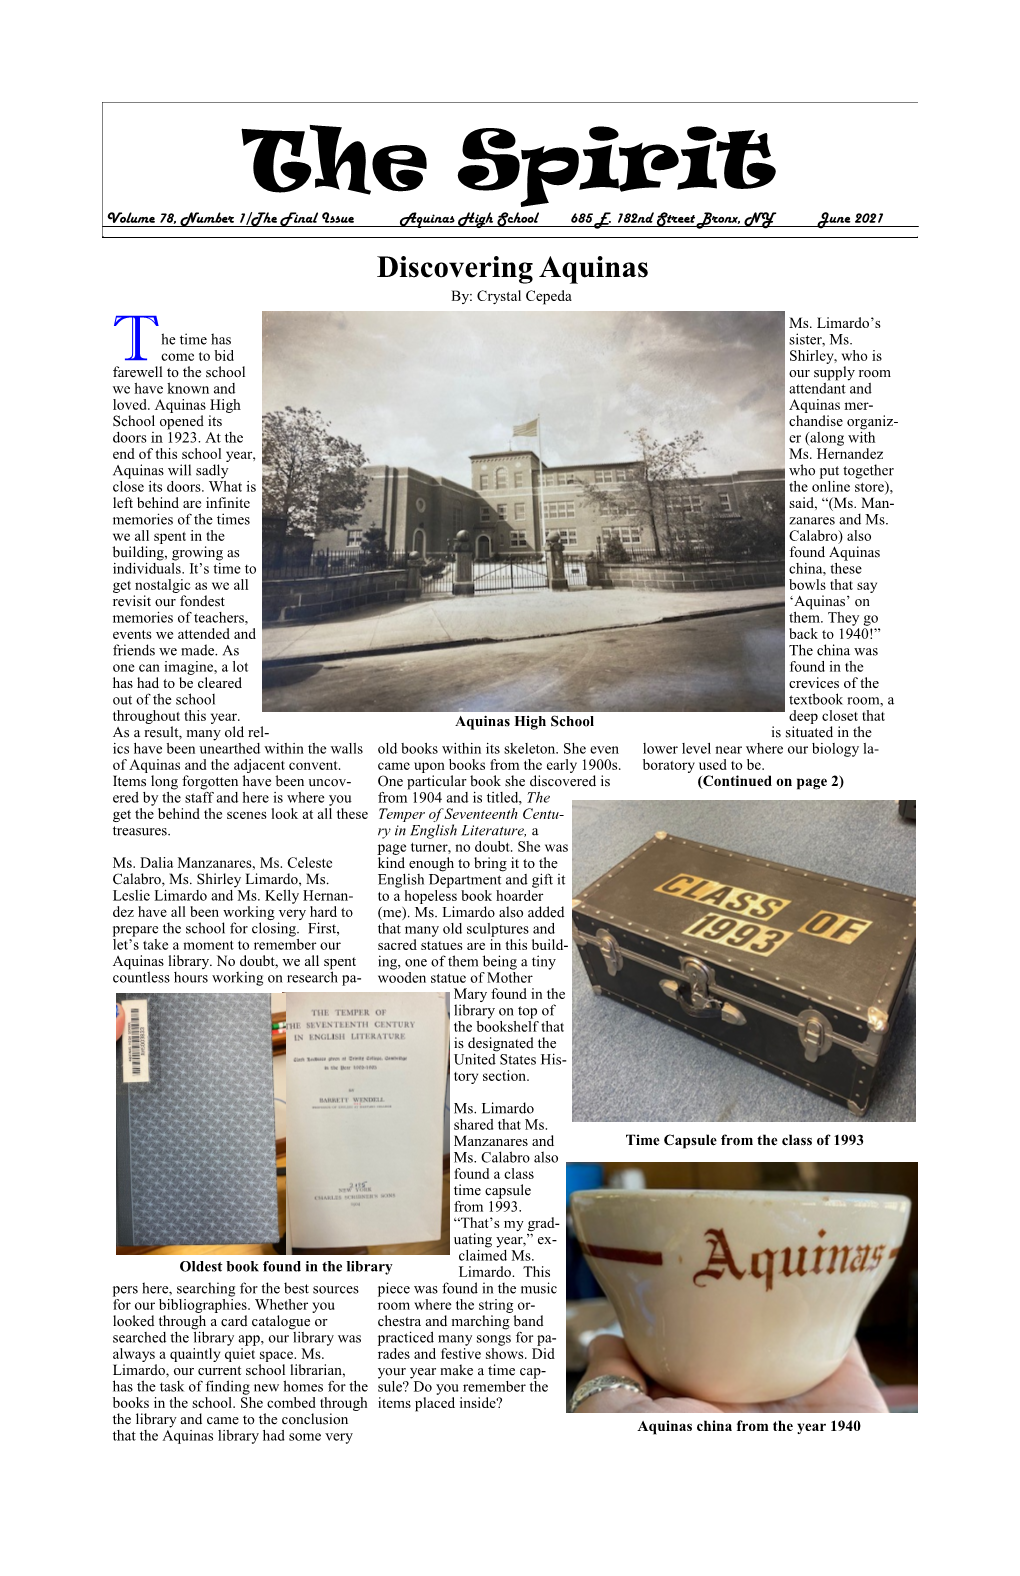 The Spirit Volume 78, Number 1 /The Final Issue Aquinas High School 685 E